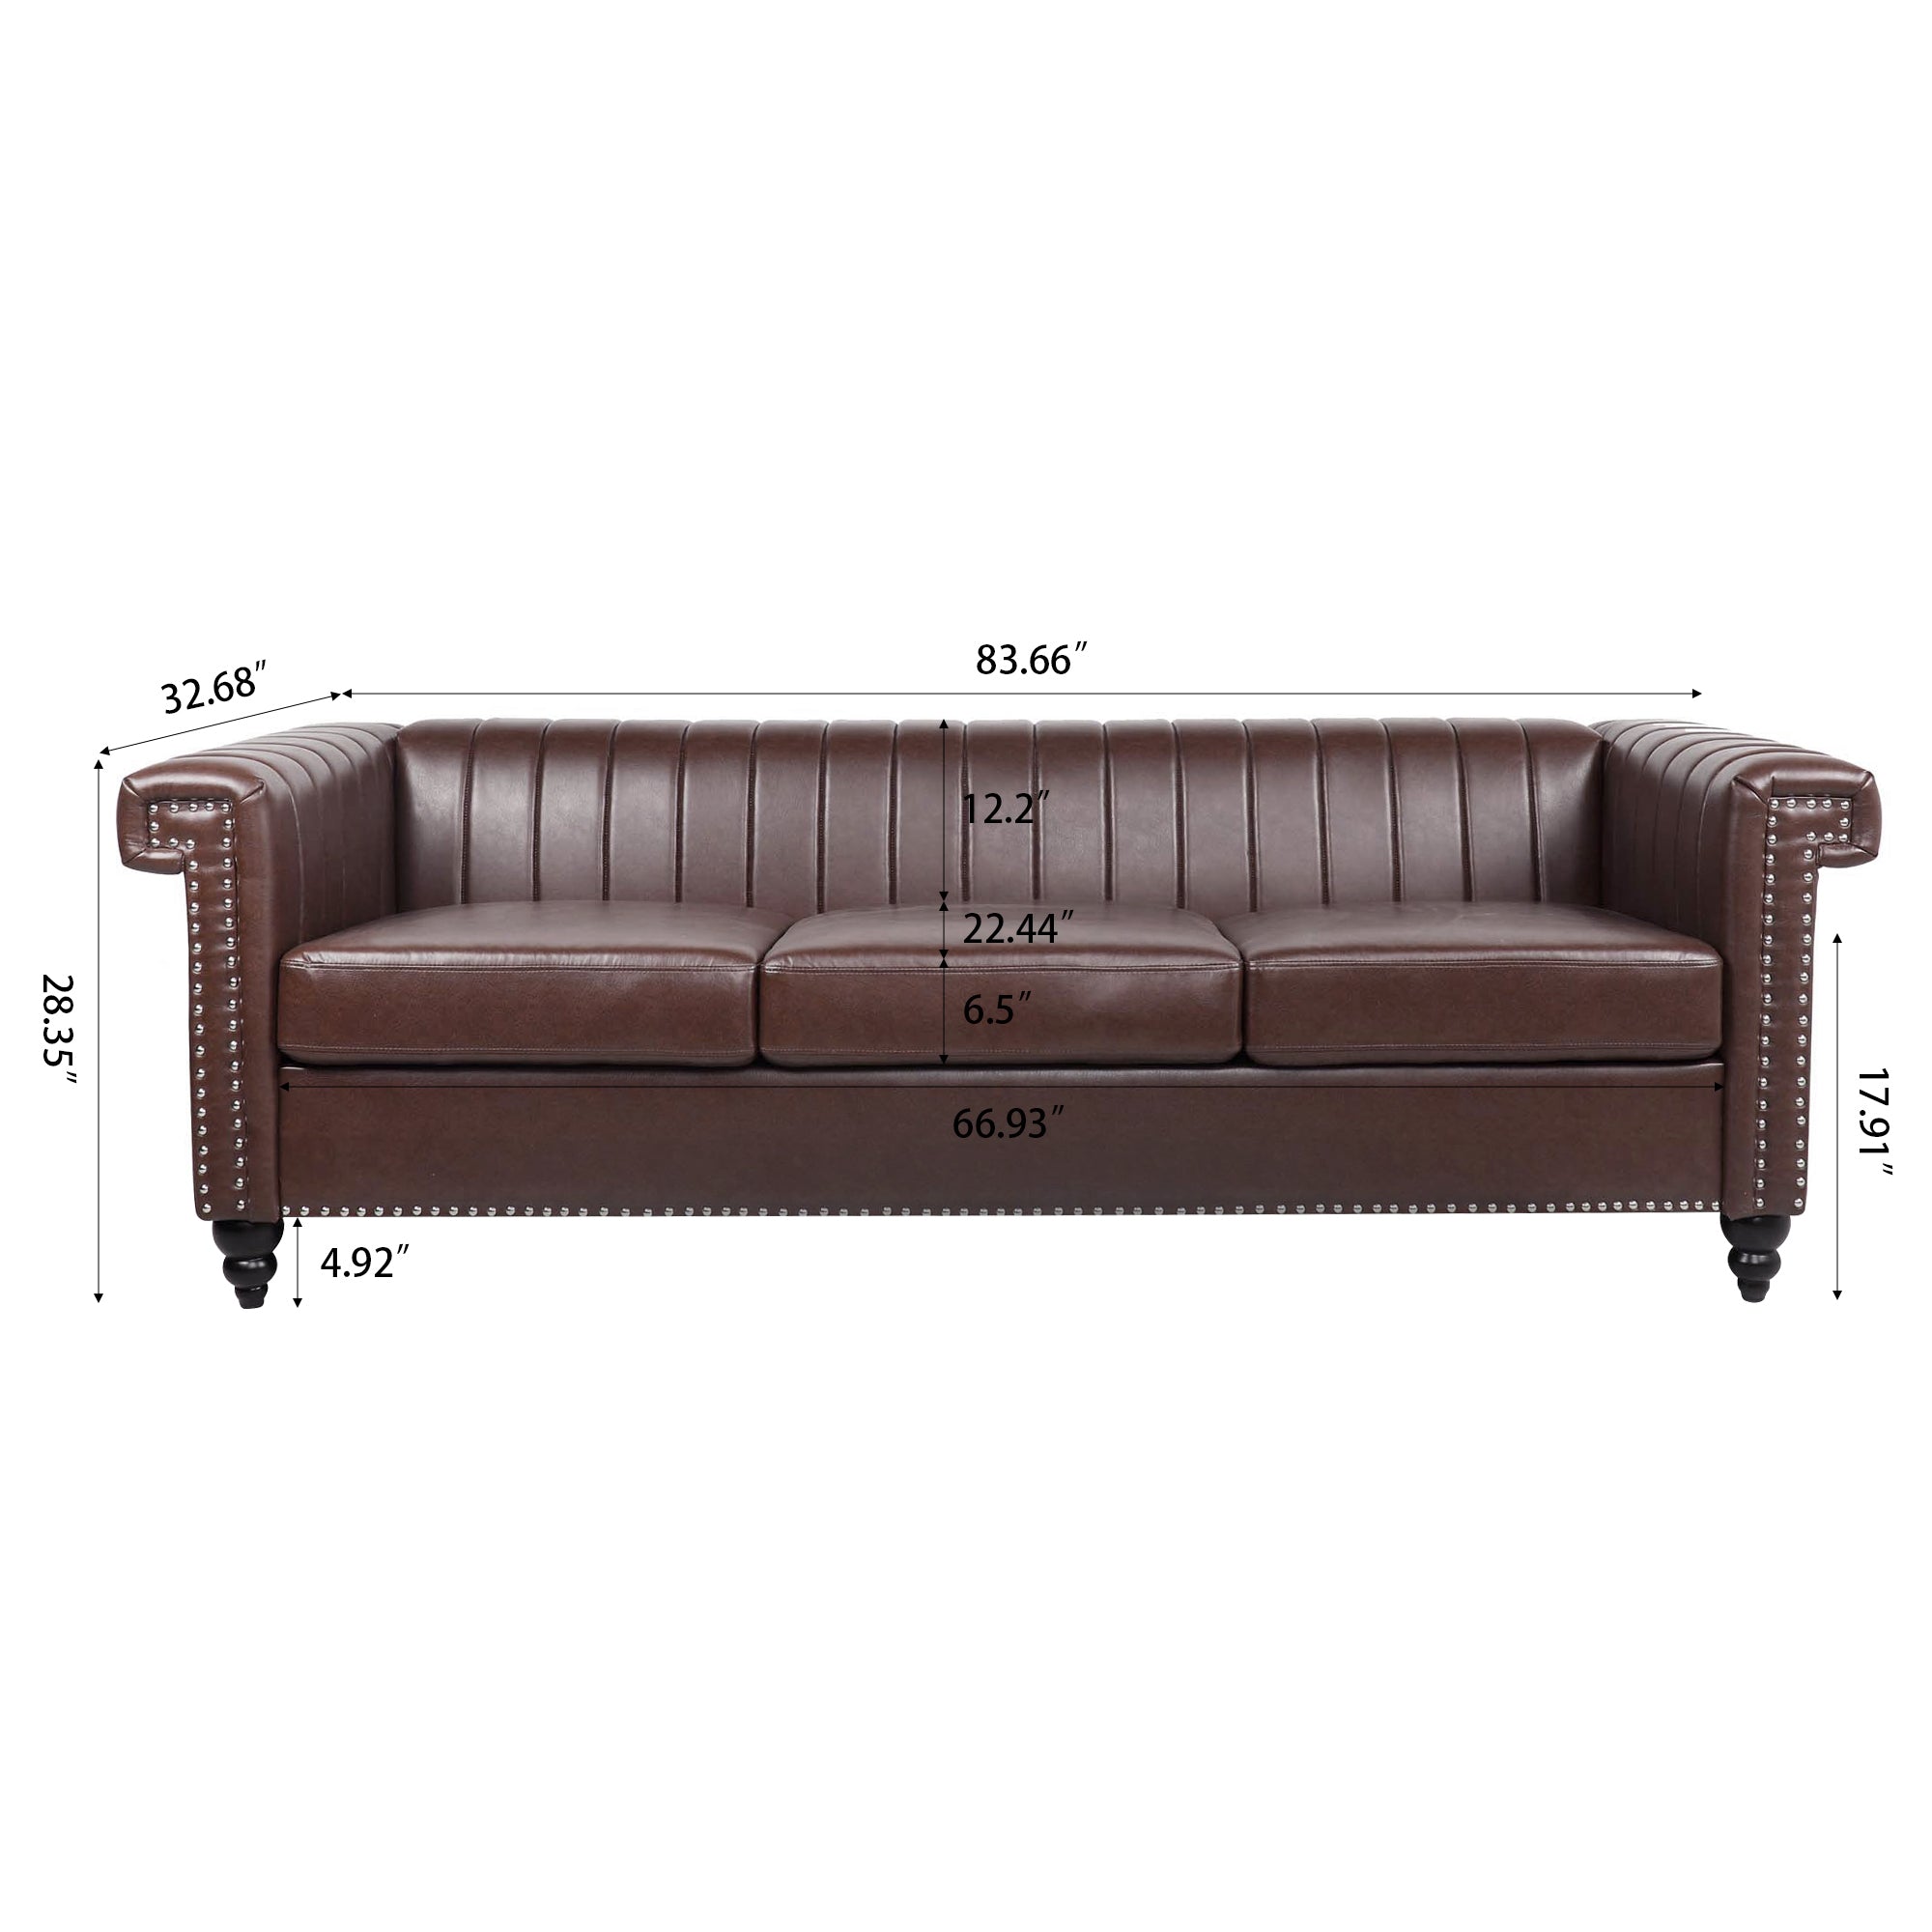 Auston 83" Brown Faux Leather Chesterfield Sofa